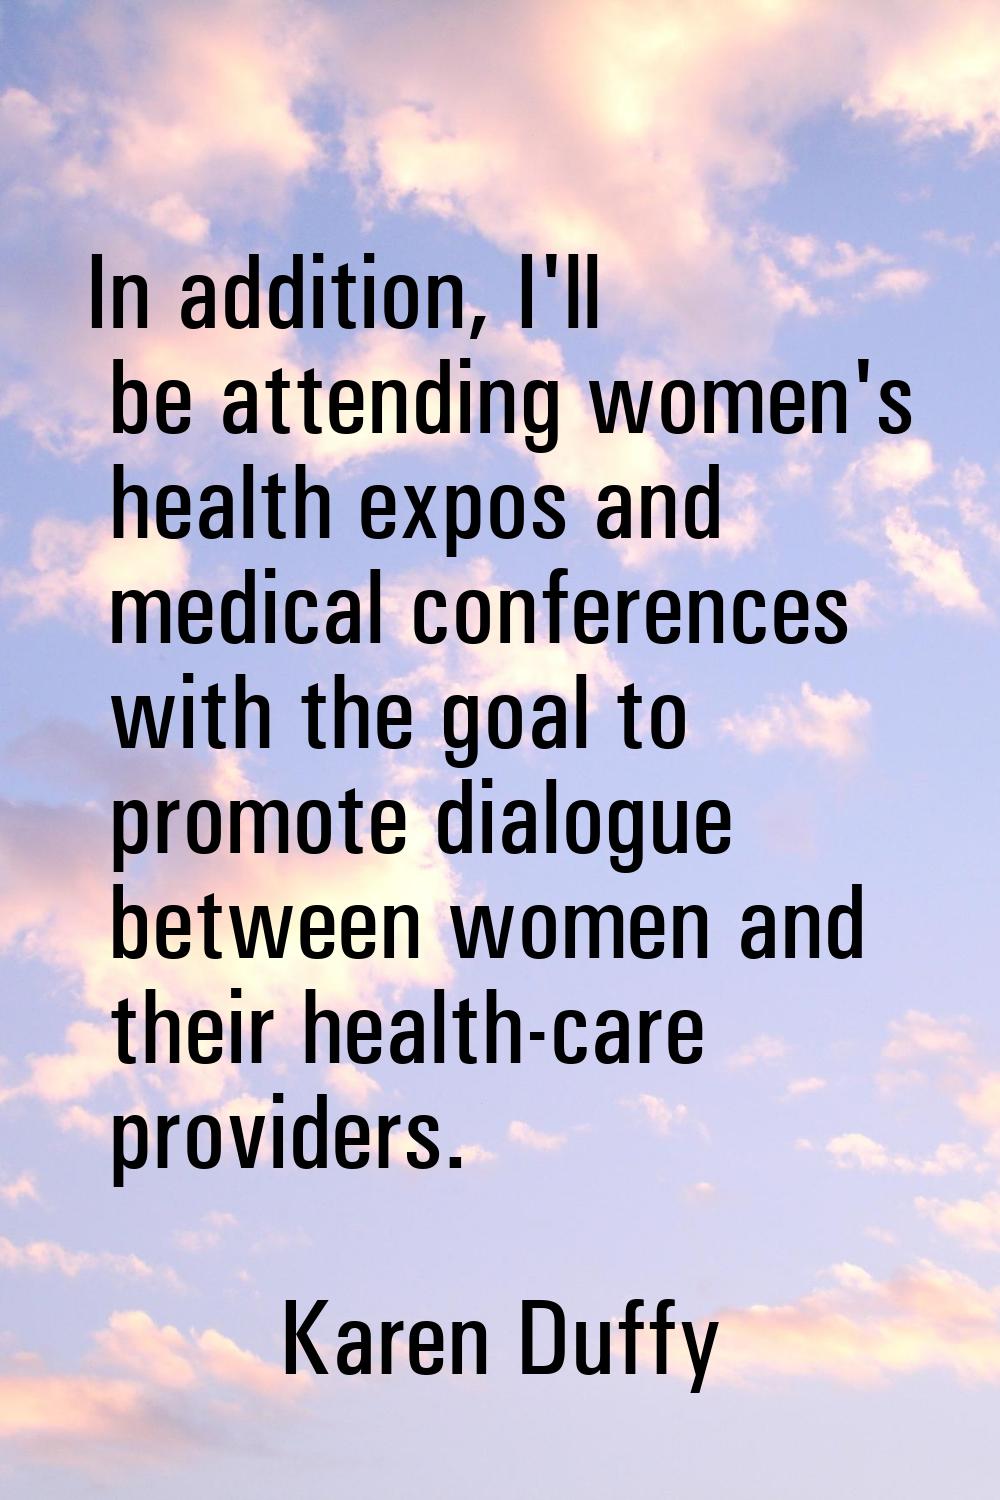 In addition, I'll be attending women's health expos and medical conferences with the goal to promot